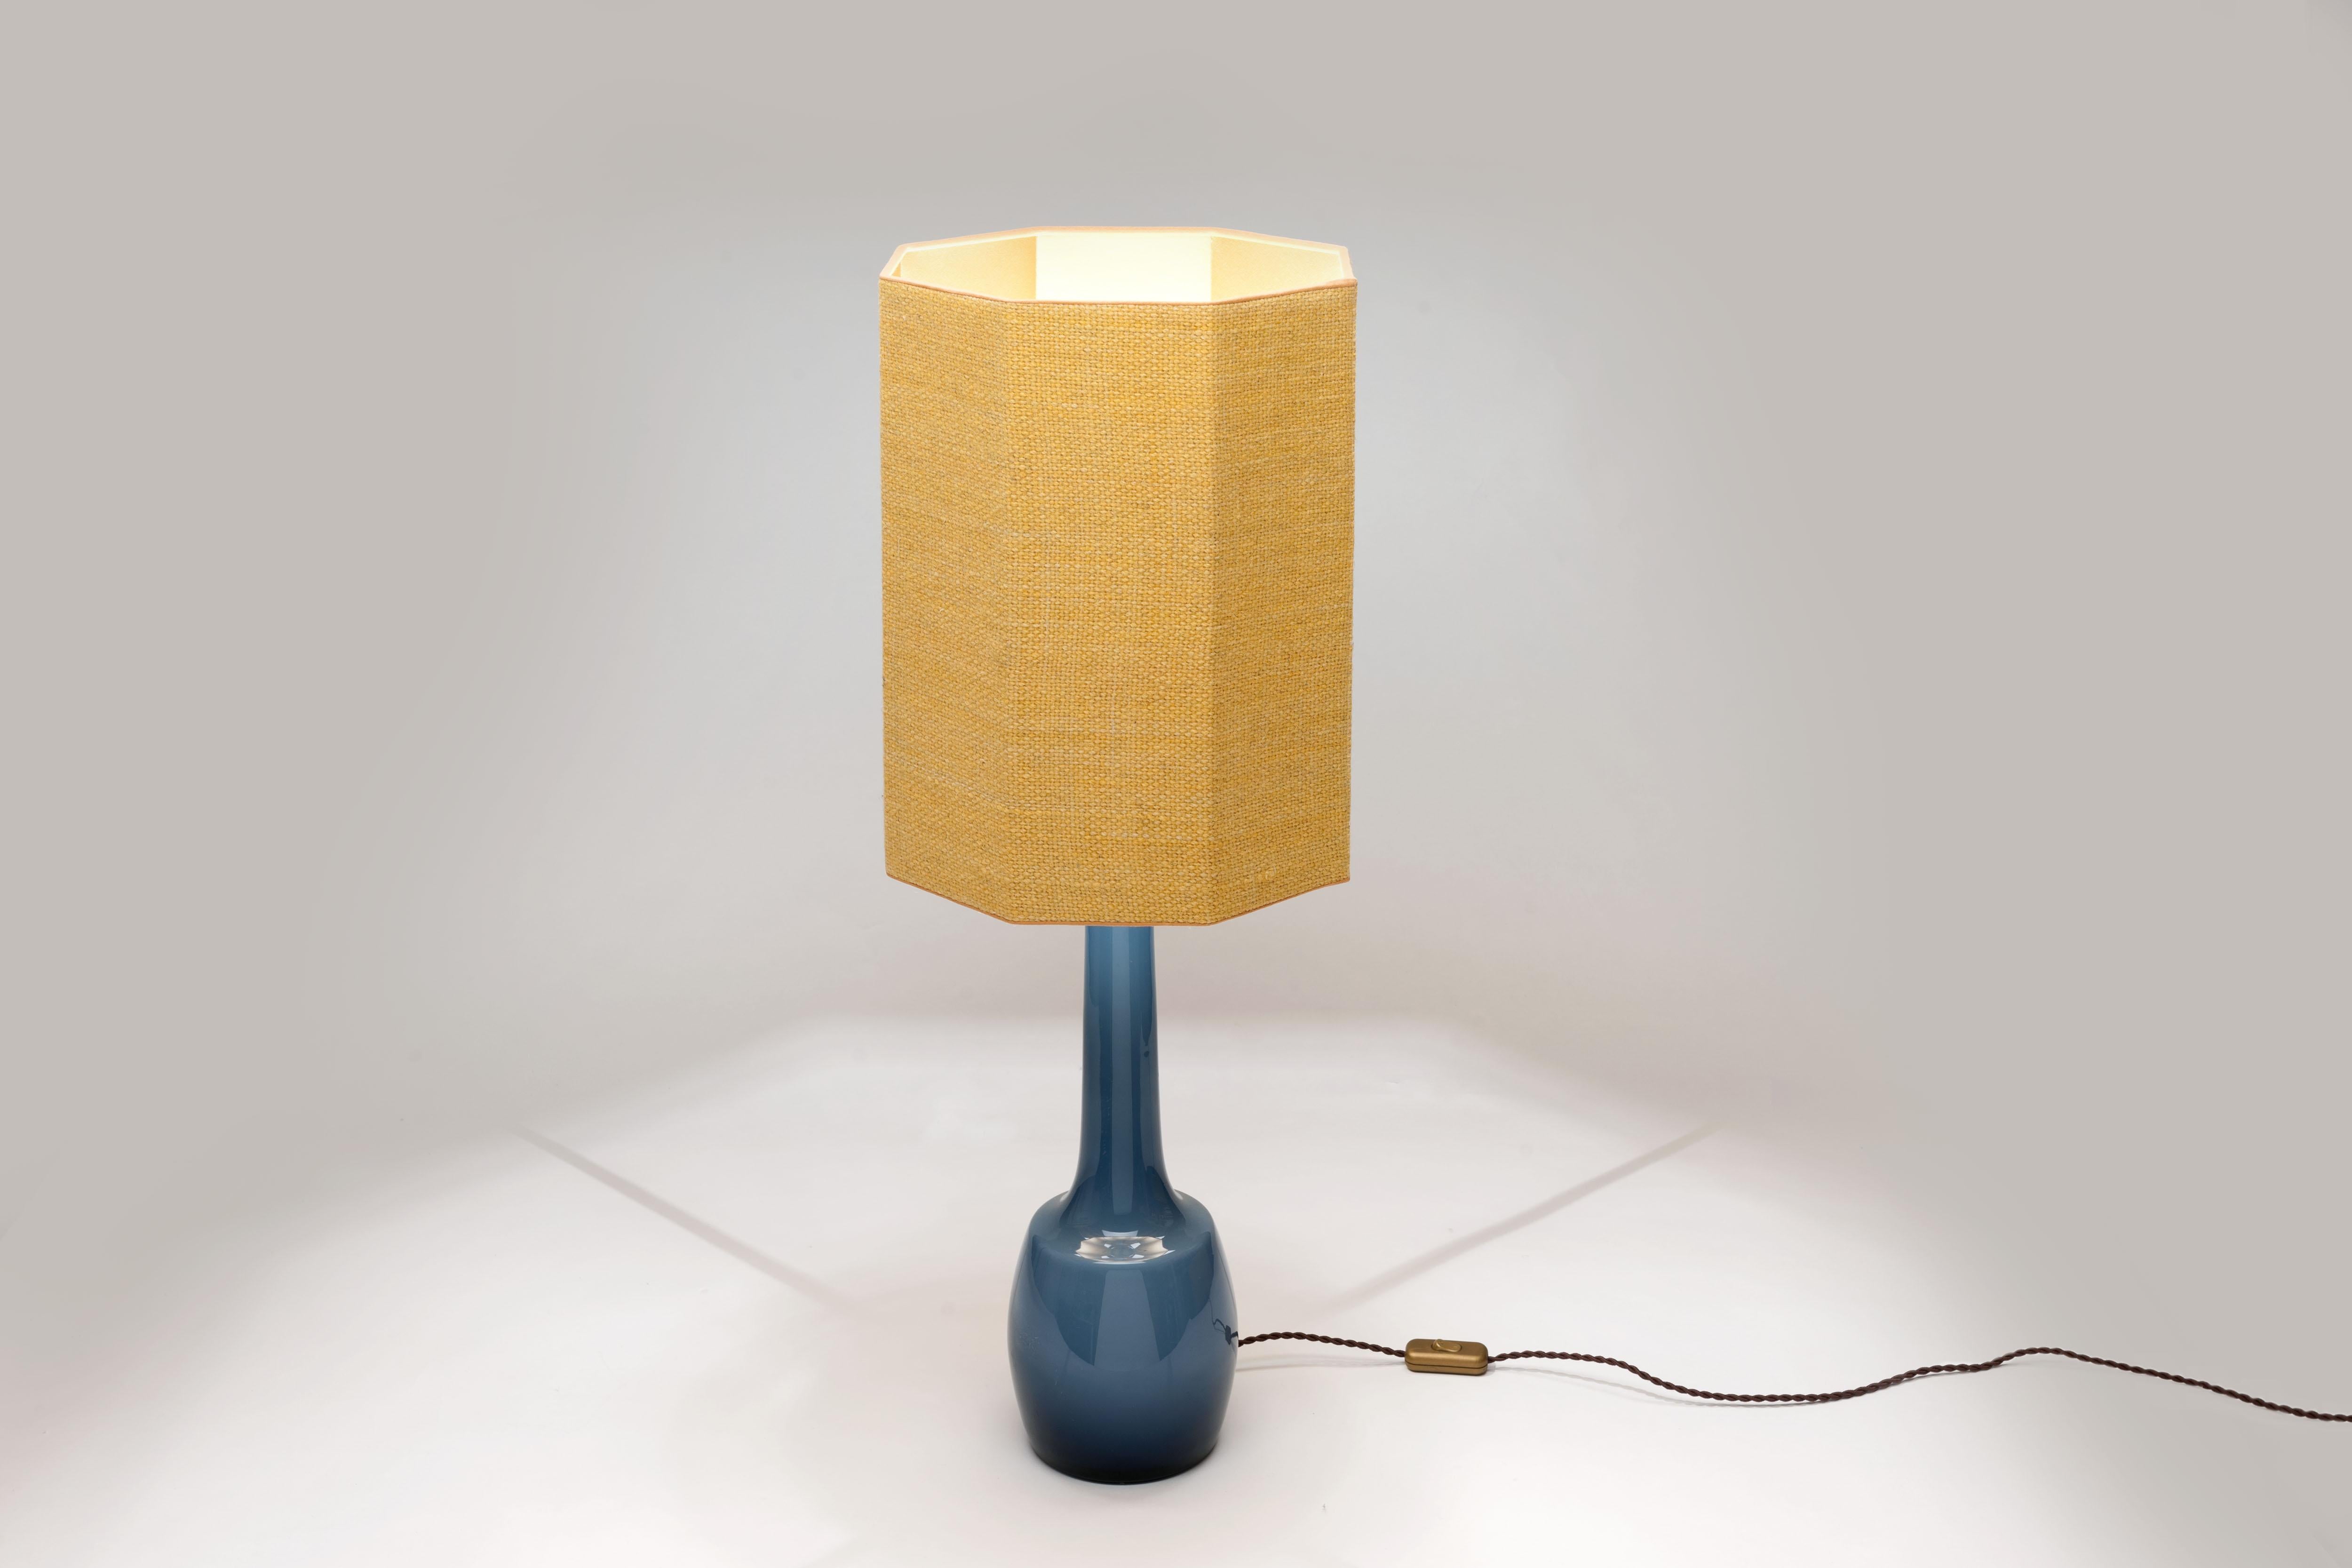 Large blue 1960s glass table lamp by Bergboms, Sweden made by Holmegaard Denmark with brass fittings. The special shade is a high end custom handmade octagonal shaped hood executed in a yellow handwoven coarse linen fabric. The inside of the shade